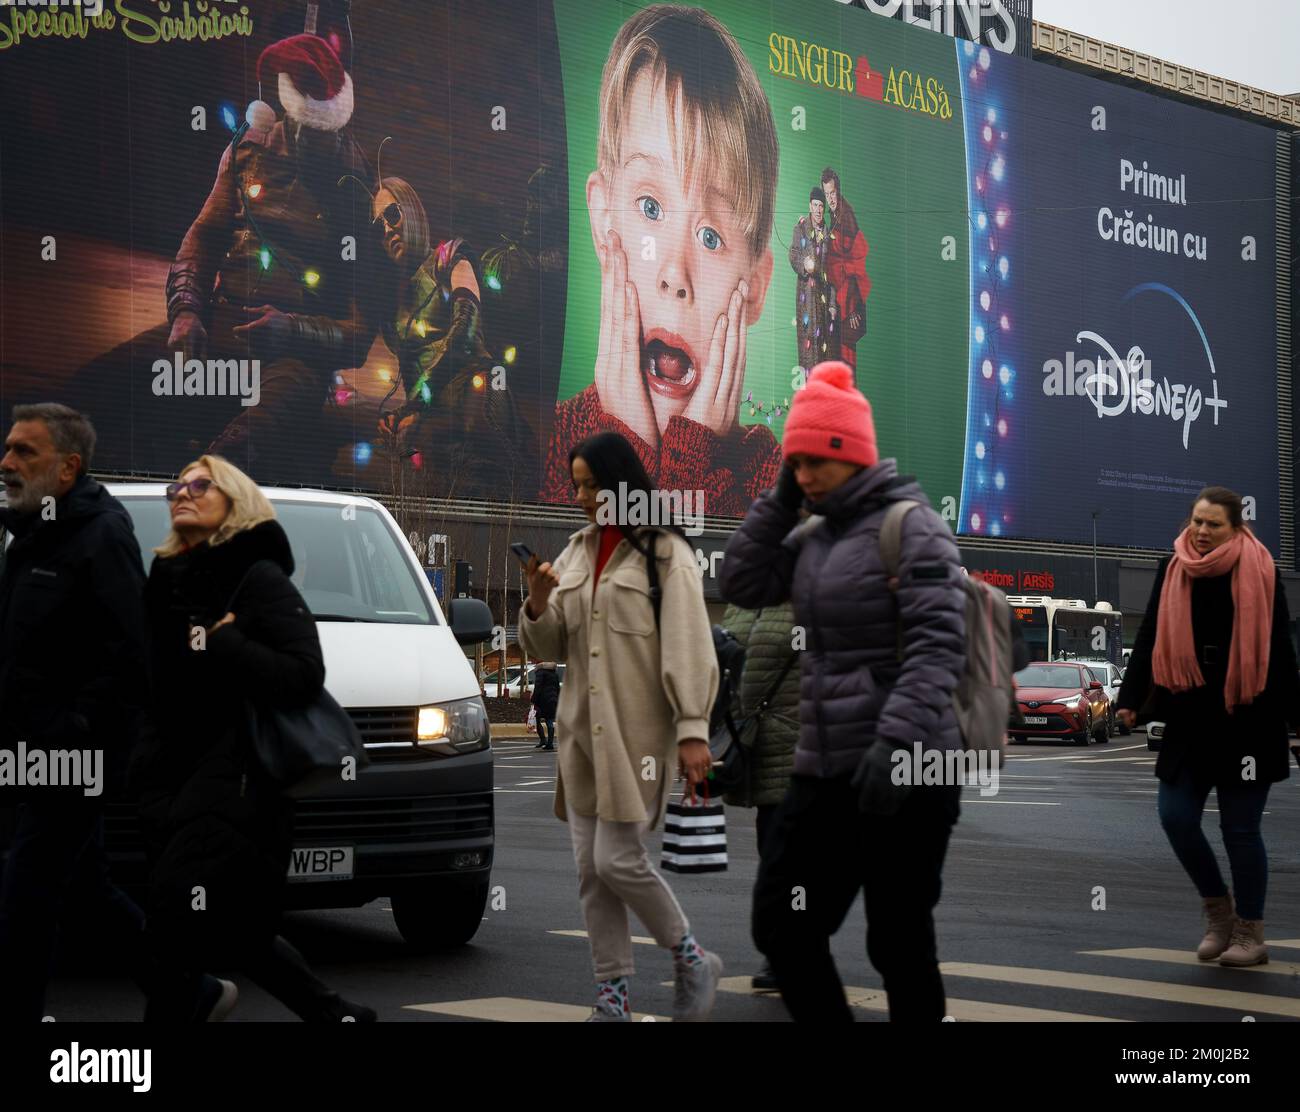 Bucharest, Romania - November 22, 2022: Extra large banner advertising Home Alone movie is displayed on the Unirea Shopping Center, in downtown Buchar Stock Photo